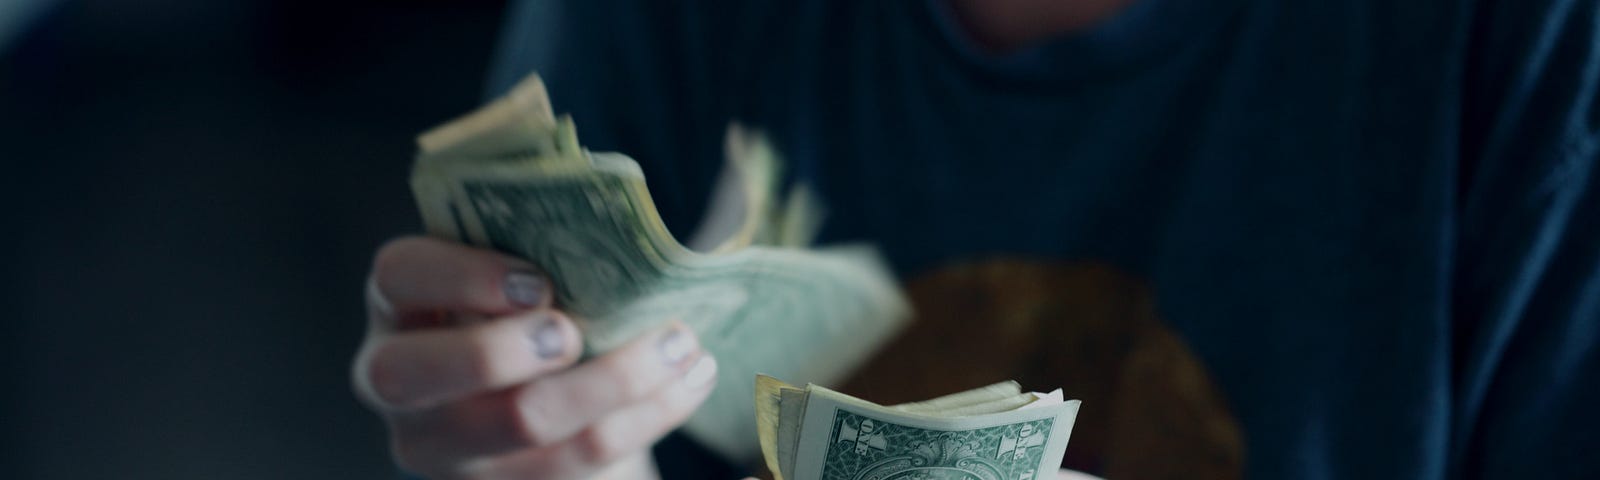 person counting money in hand